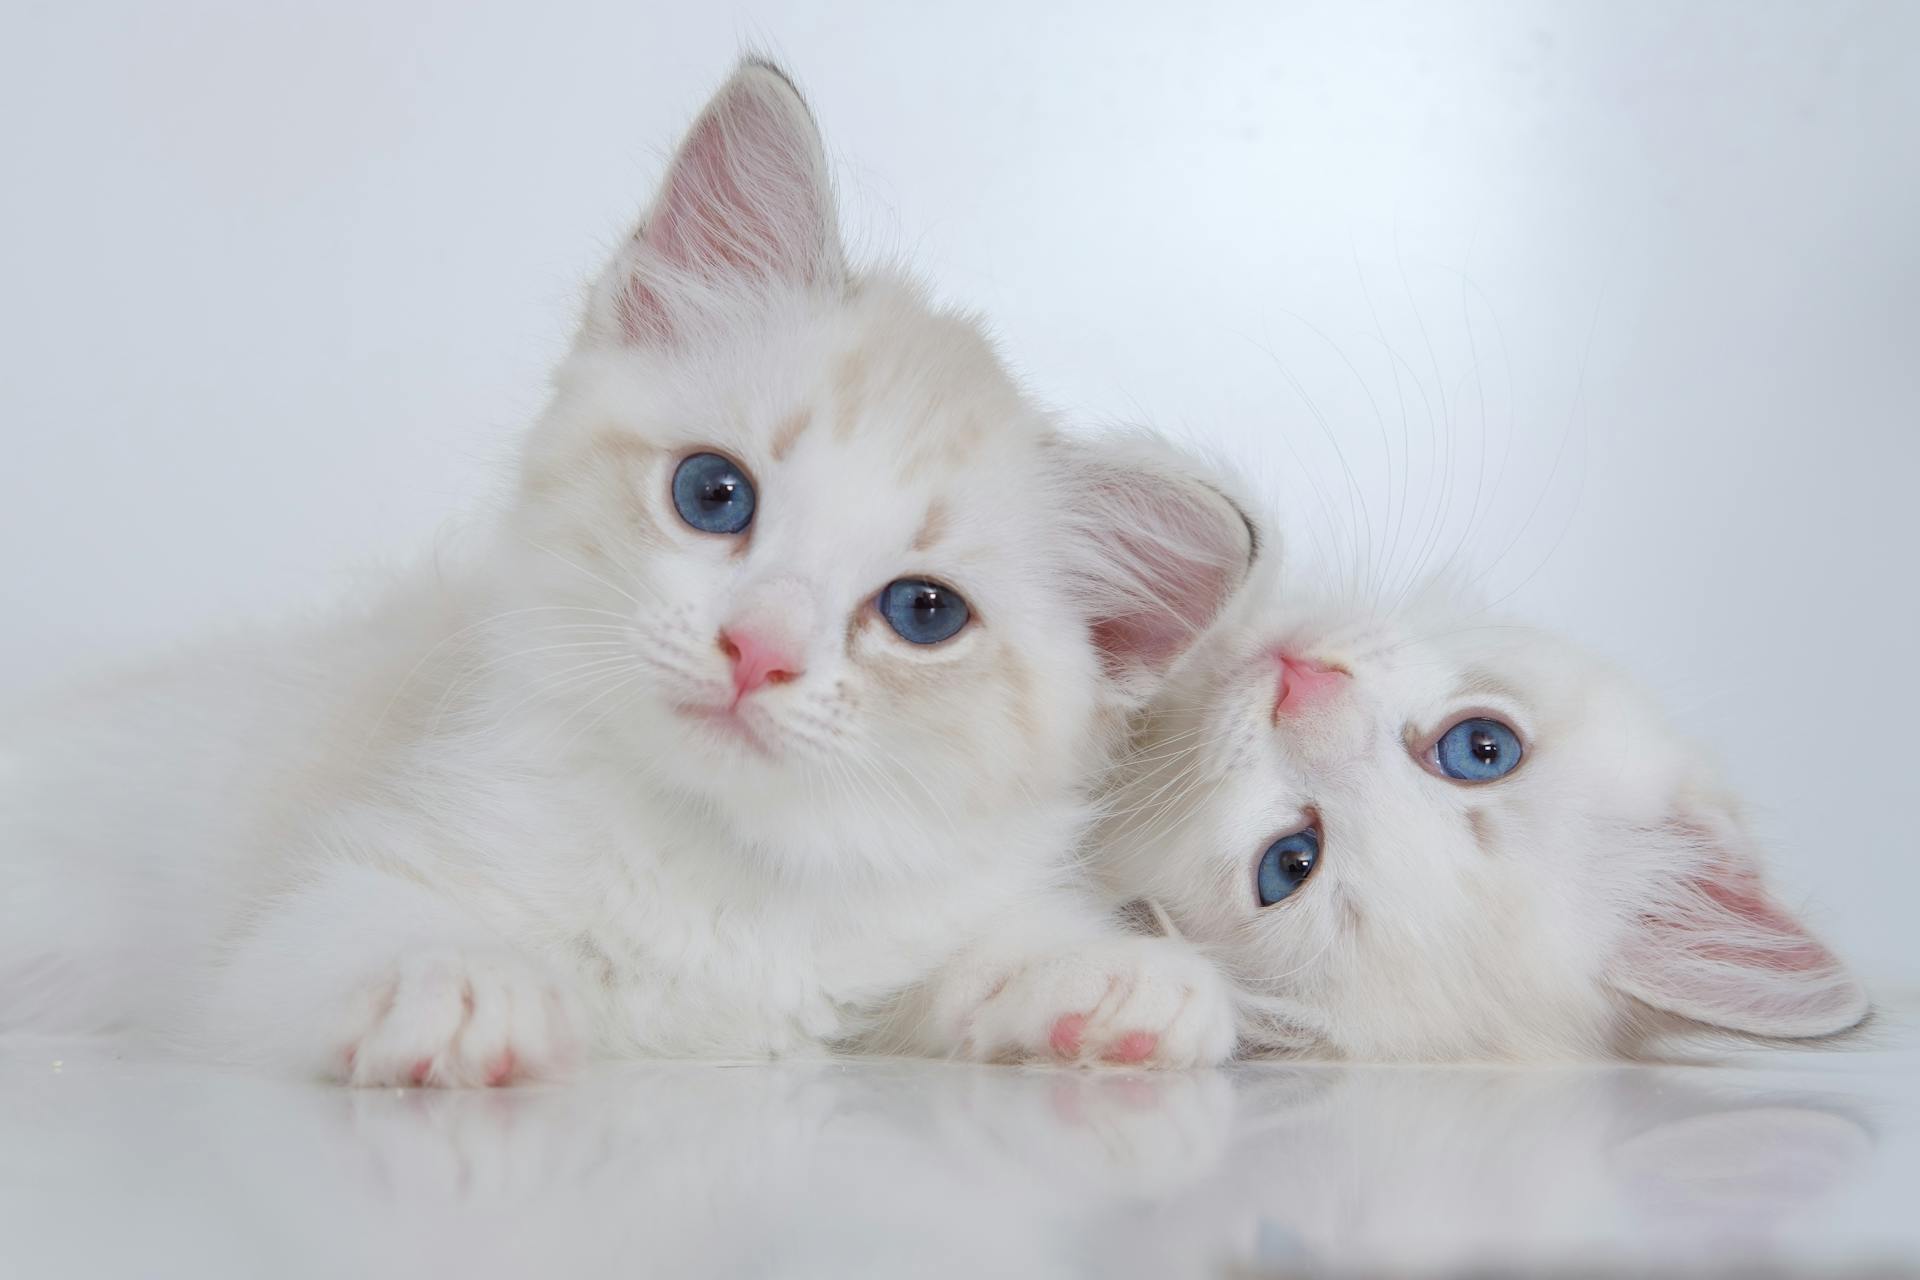 Cute white fluffy kitties with blue eyes lying on reflective surface together and looking at camera